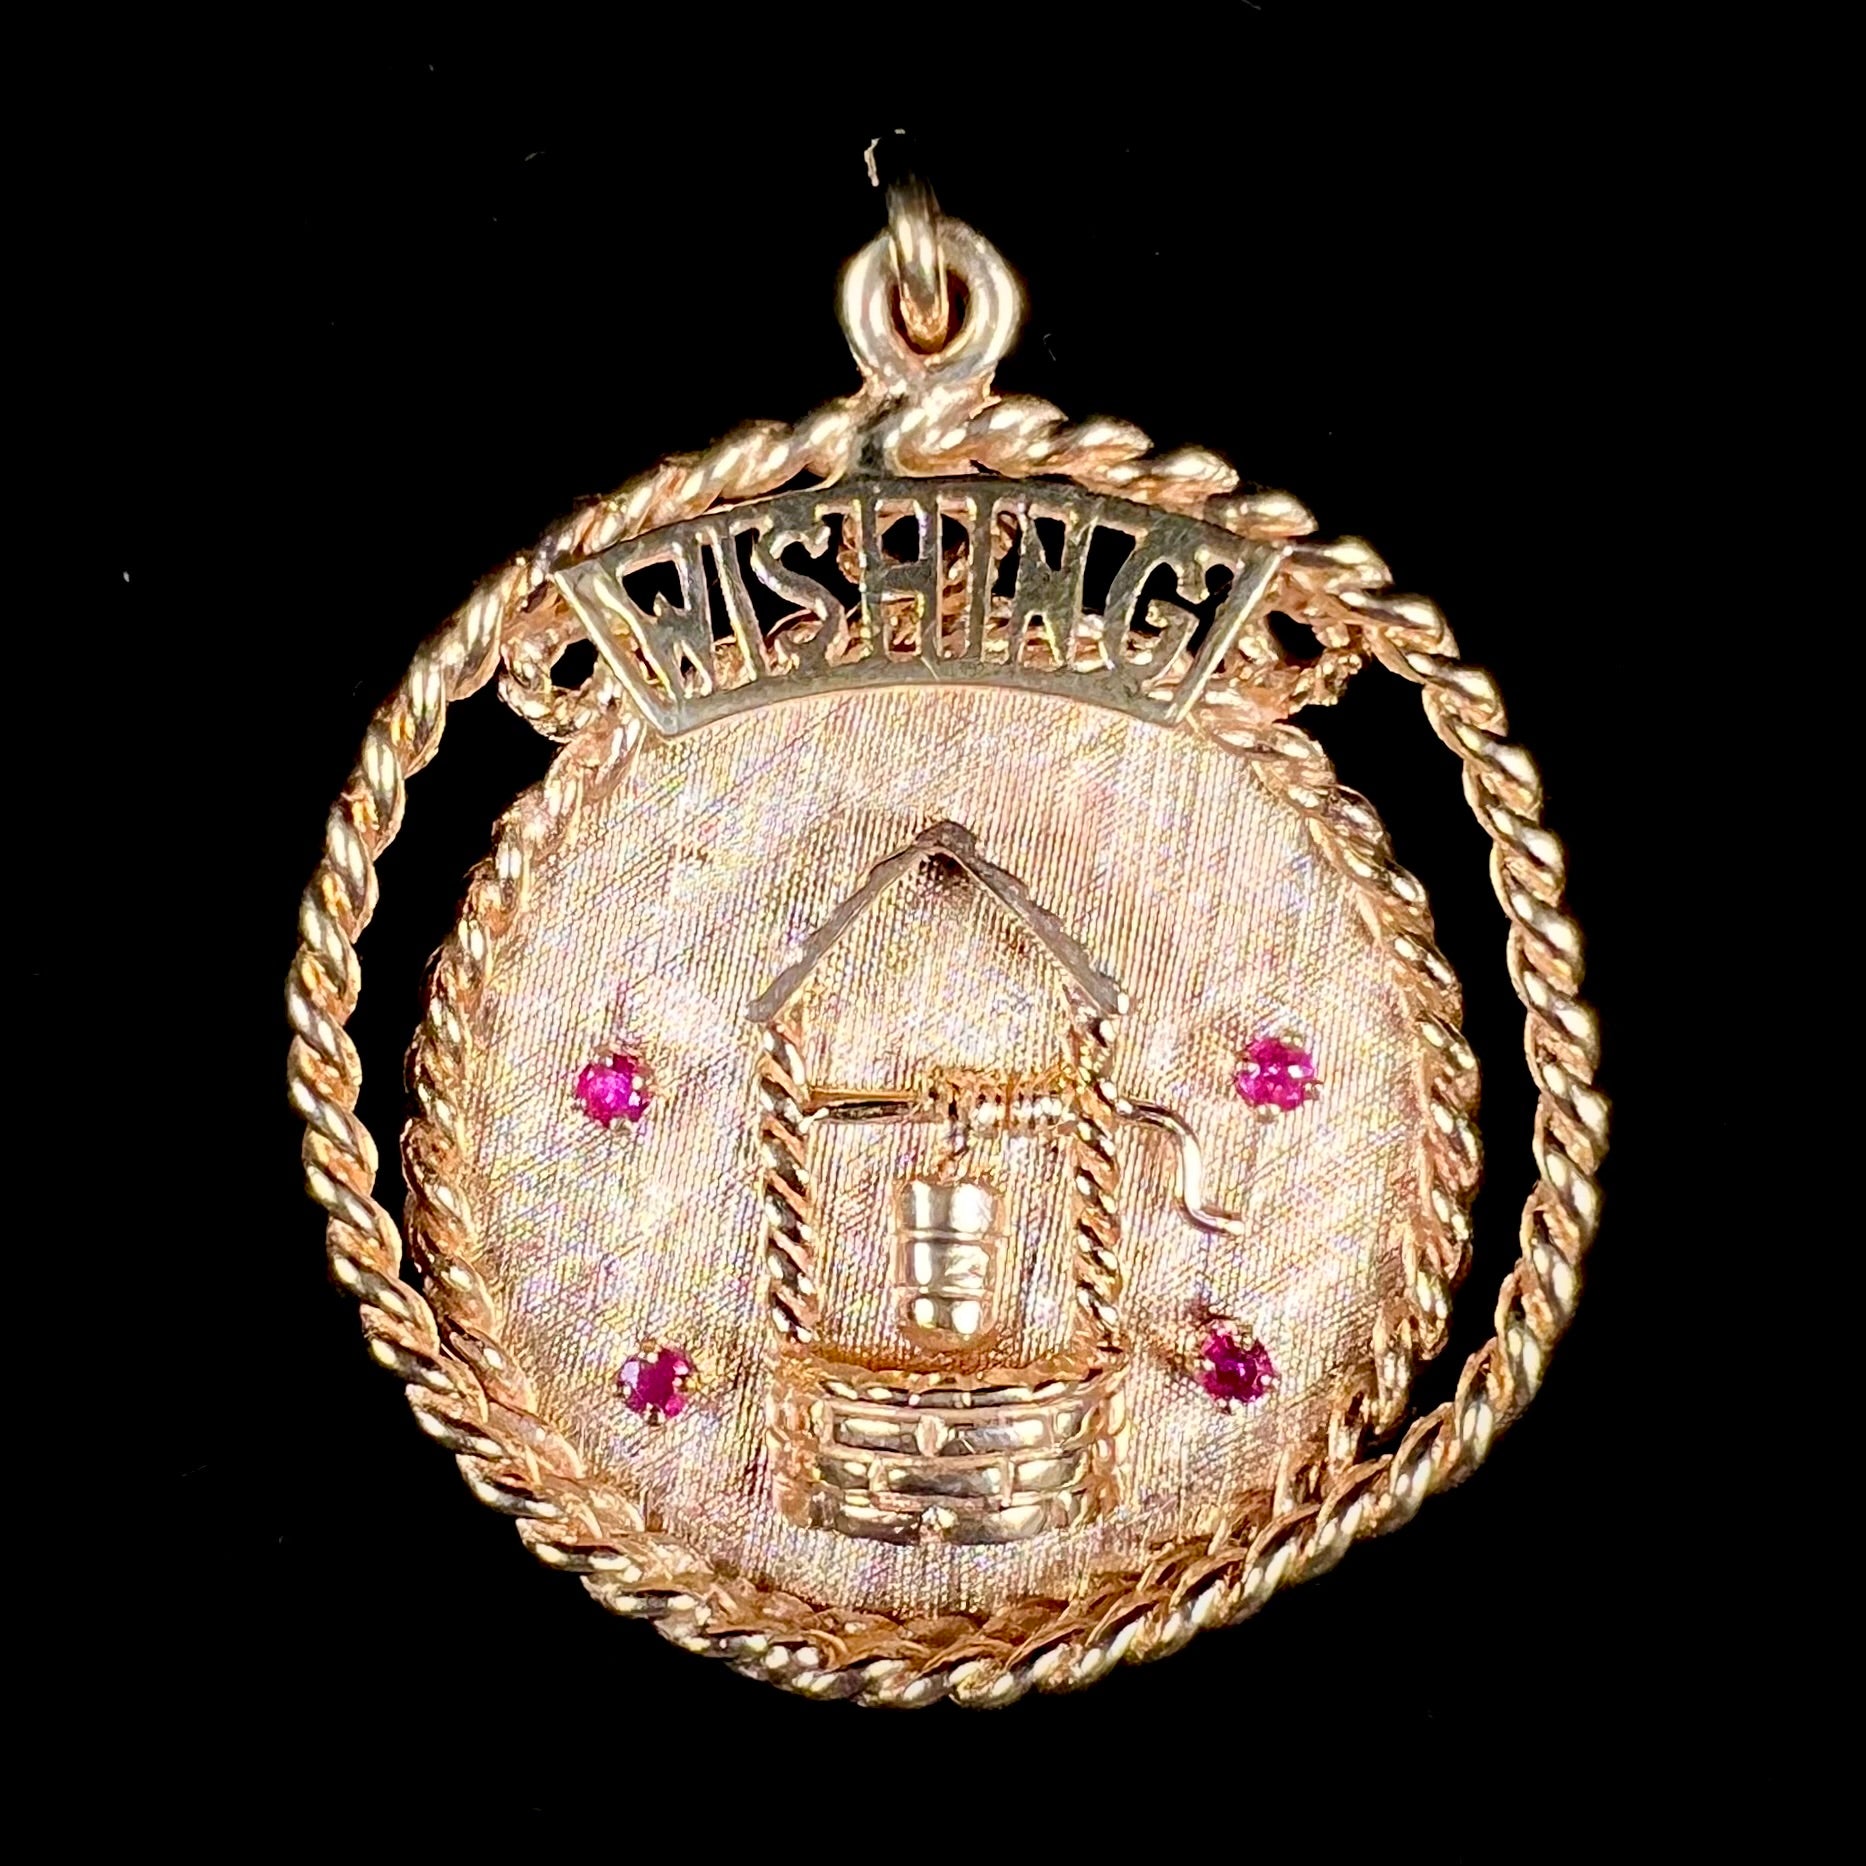 A yellow gold pendant depicting a picture of a wishing well, set with four natural rubies.  The word "WISHING" sits at the top of the pendant.